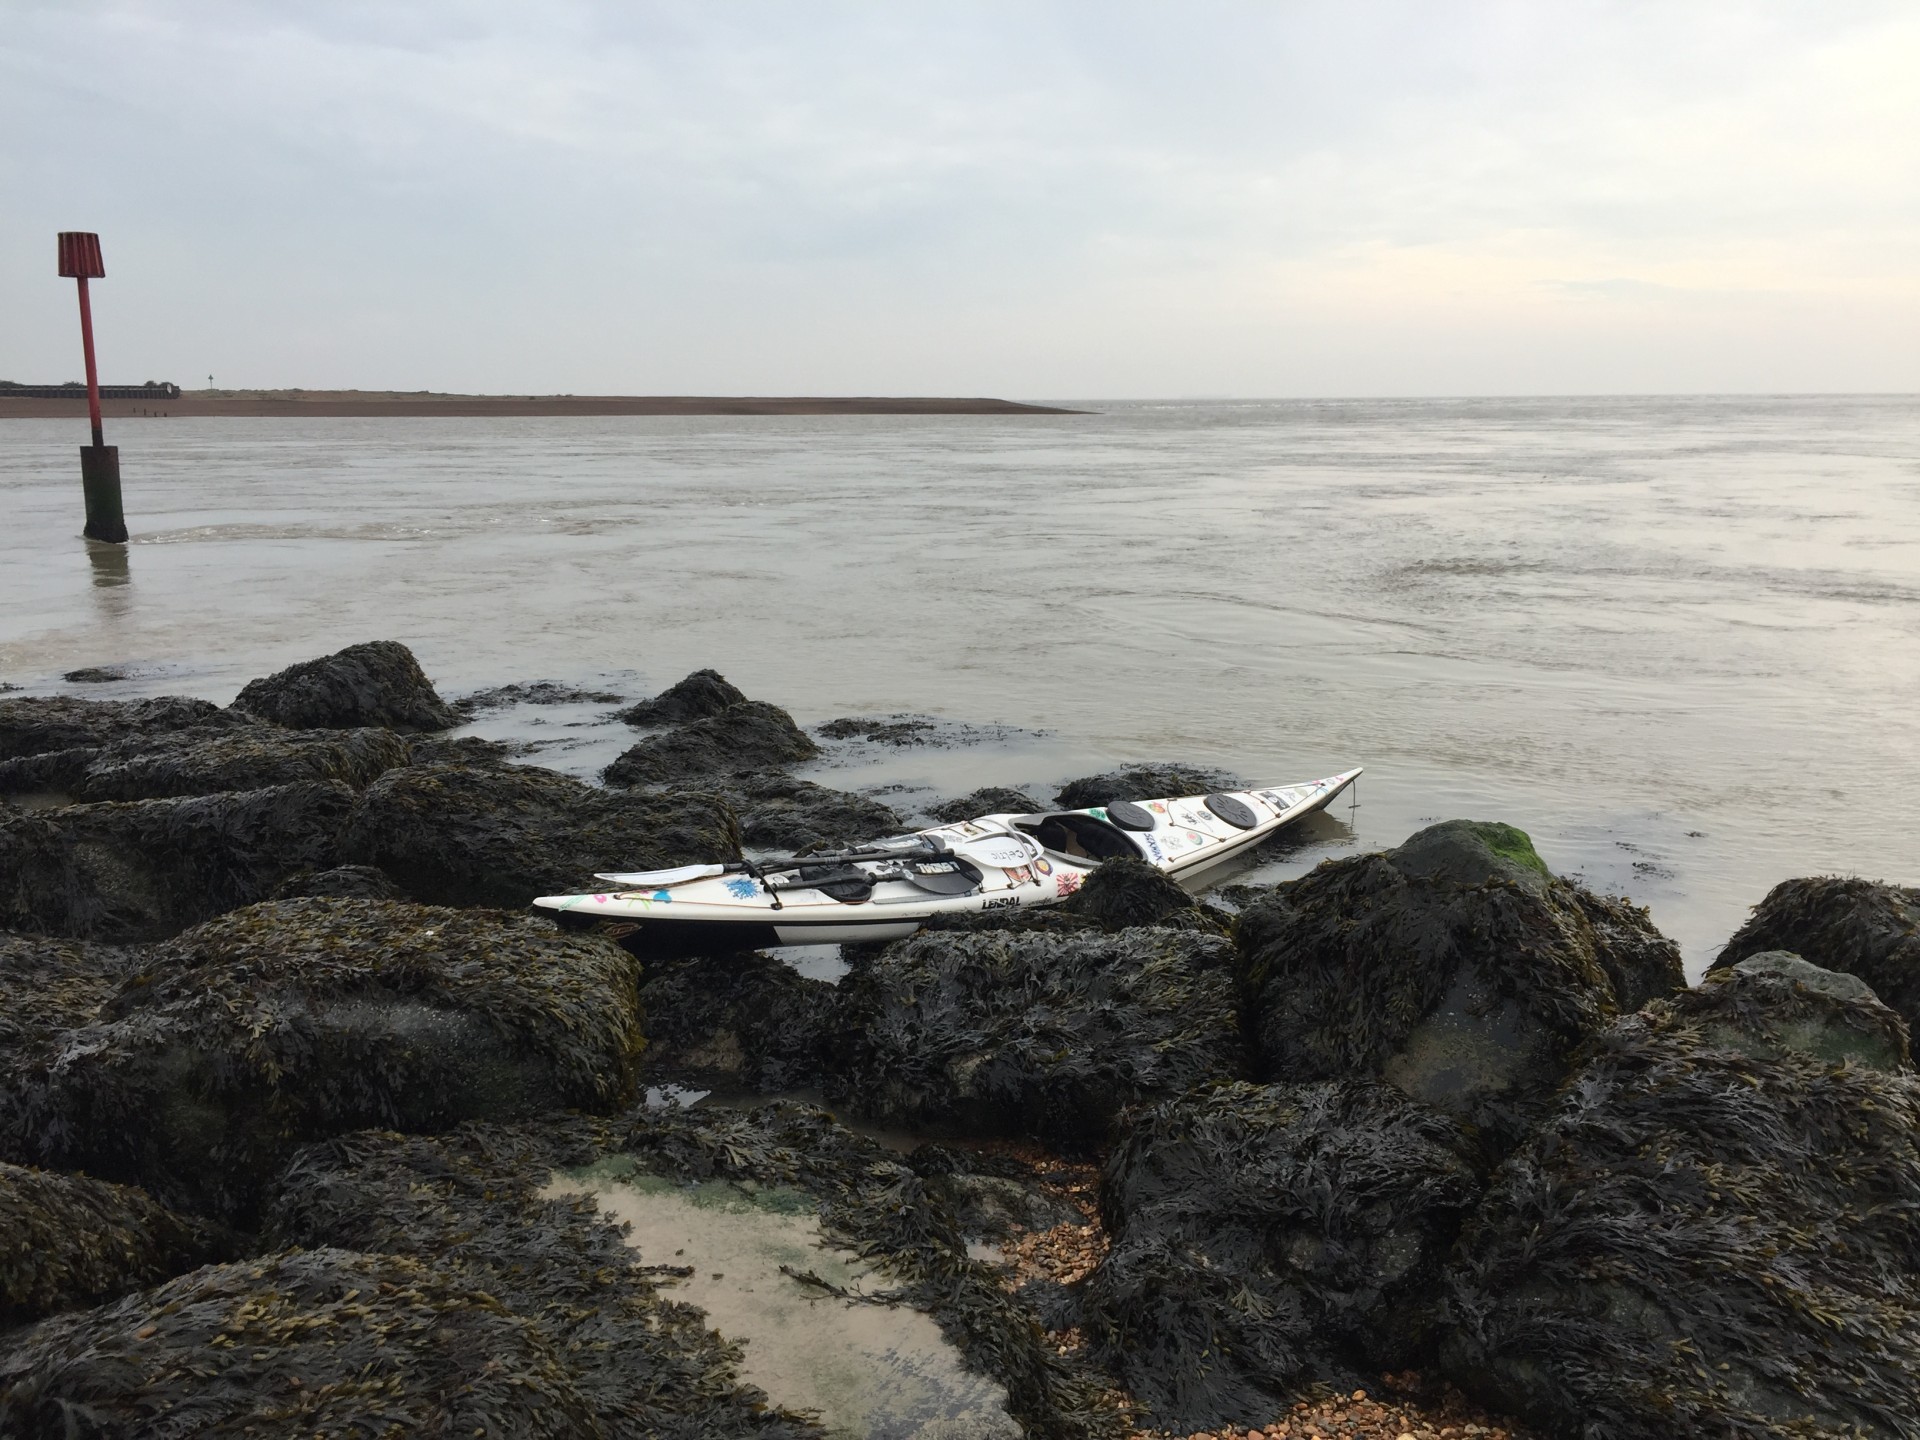 Sea kayak pulled up onto rocks on an estuary in Suffolk.